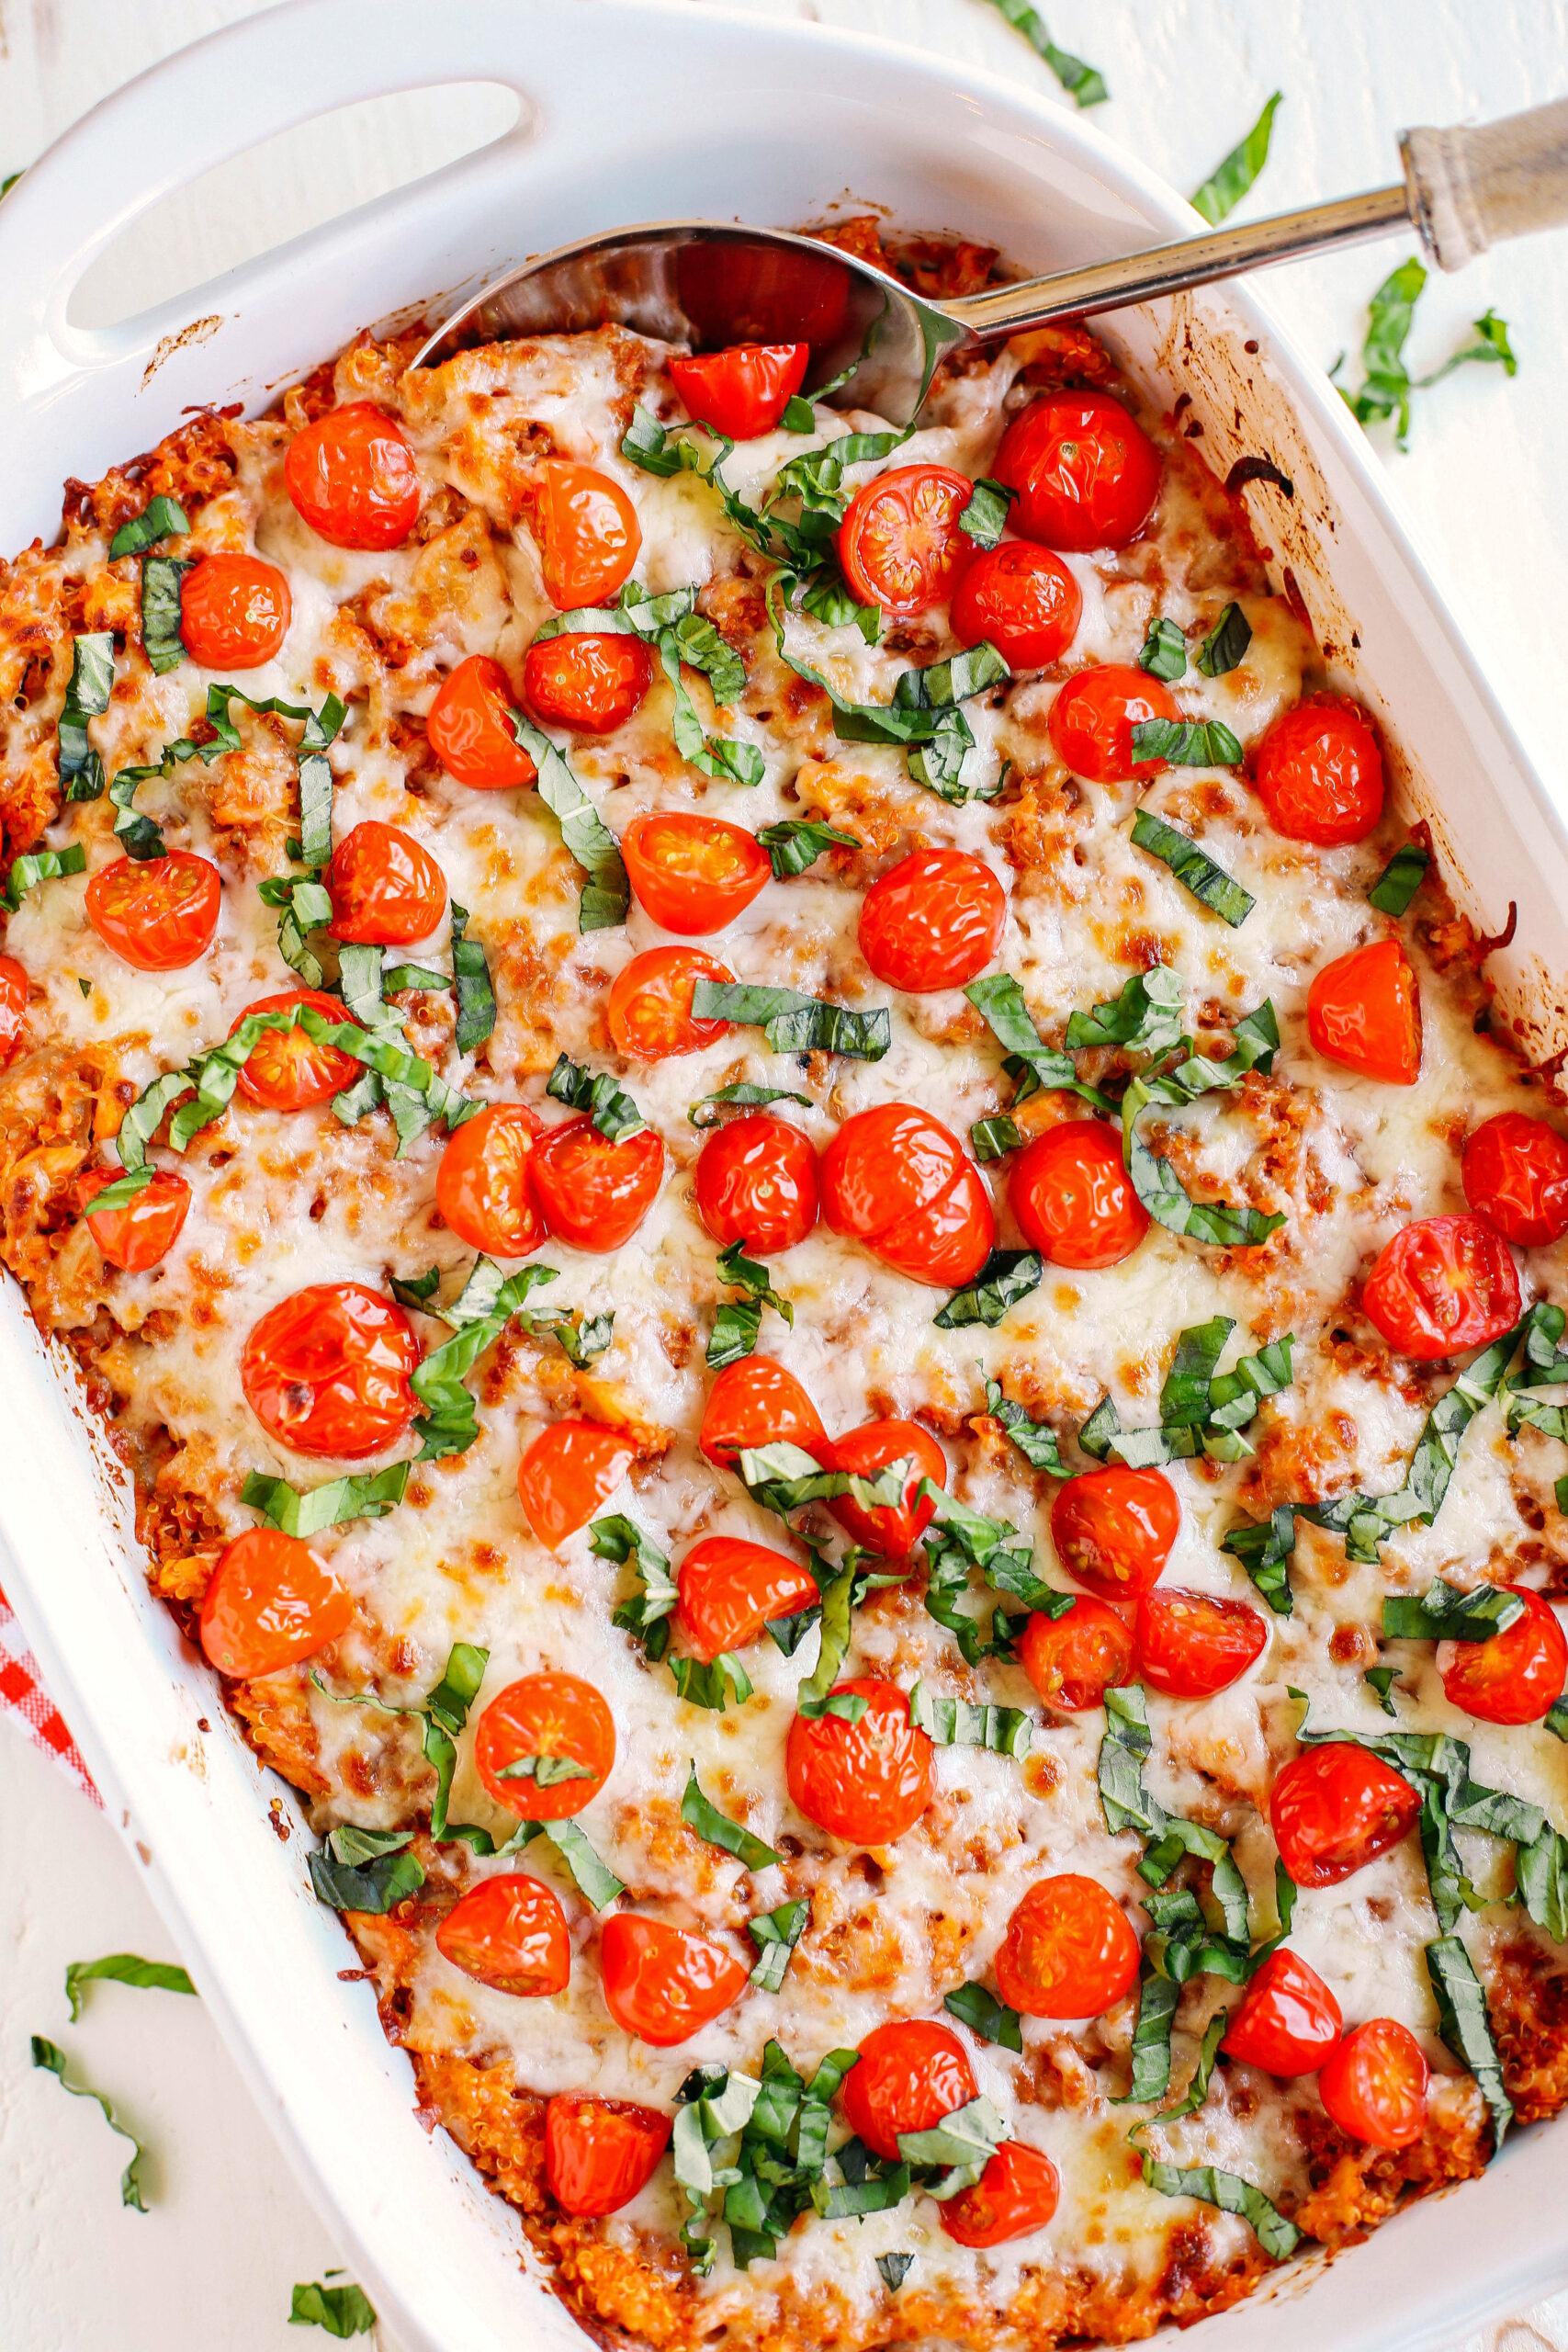 This super flavorful Cheesy Caprese Chicken and Quinoa Casserole is the perfect weeknight meal that is hearty, full of flavor and sure to please the entire family!